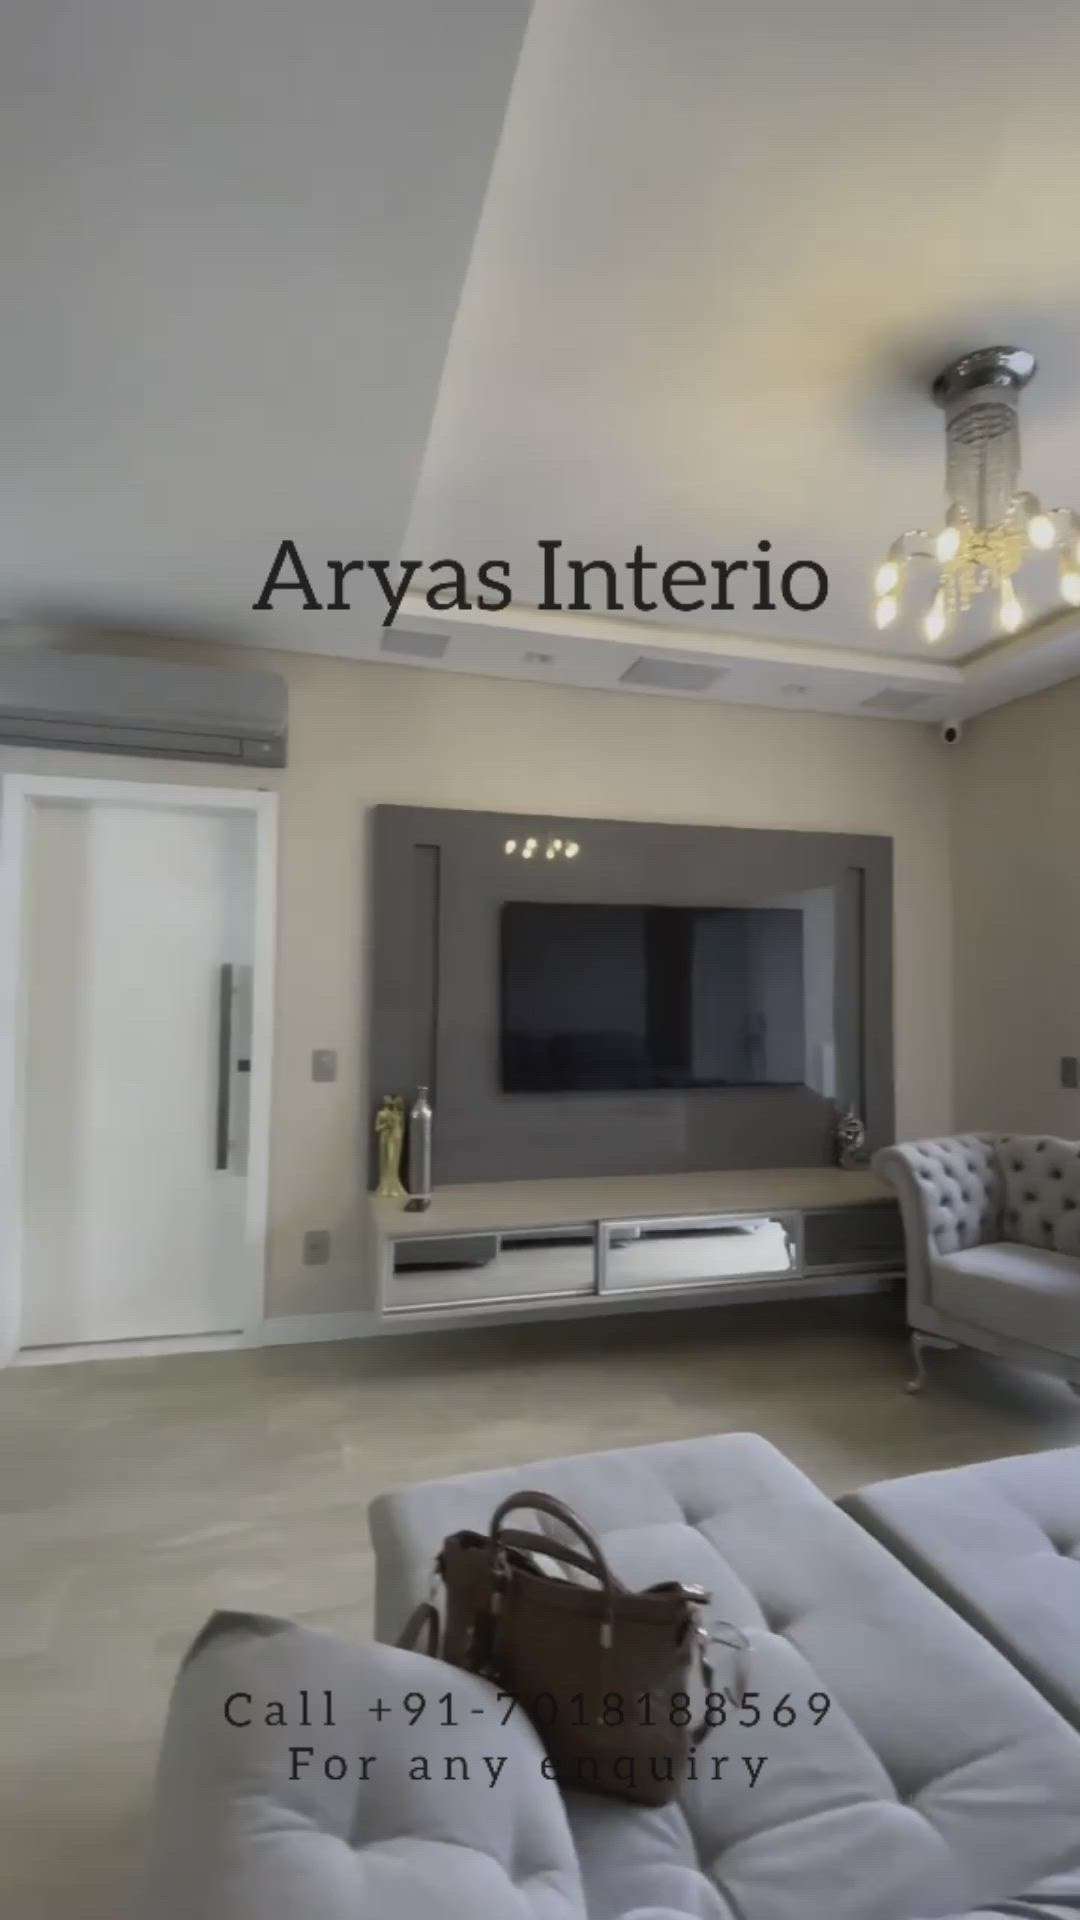 Ultra luxury flat interiors services by Design Interios a unit of Aryas interio & Infra Group,
Provide complete end to end Professional Construction & interior Services in Delhi Ncr, Gurugram, Ghaziabad, Noida, Greater Noida, Faridabad, chandigarh, Manali and Shimla. Contact us right now for any interior or renovation work, call us @ +91-7018188569 &
Visit our website at www.designinterios.com
Follow us on Instagram #aryasinterio and Facebook @aryasinterio .
#uttarpradesh #construction_himachal
#noidainterior #noida #delhincr #delhi #Delhihome  #noidaconstruction #interiordesign #interior #interiors #interiordesigner #interiordecor #interiorstyling #delhiinteriors #greaternoida #faridabad #ghaziabadinterior #ghaziabad  #chandigarh